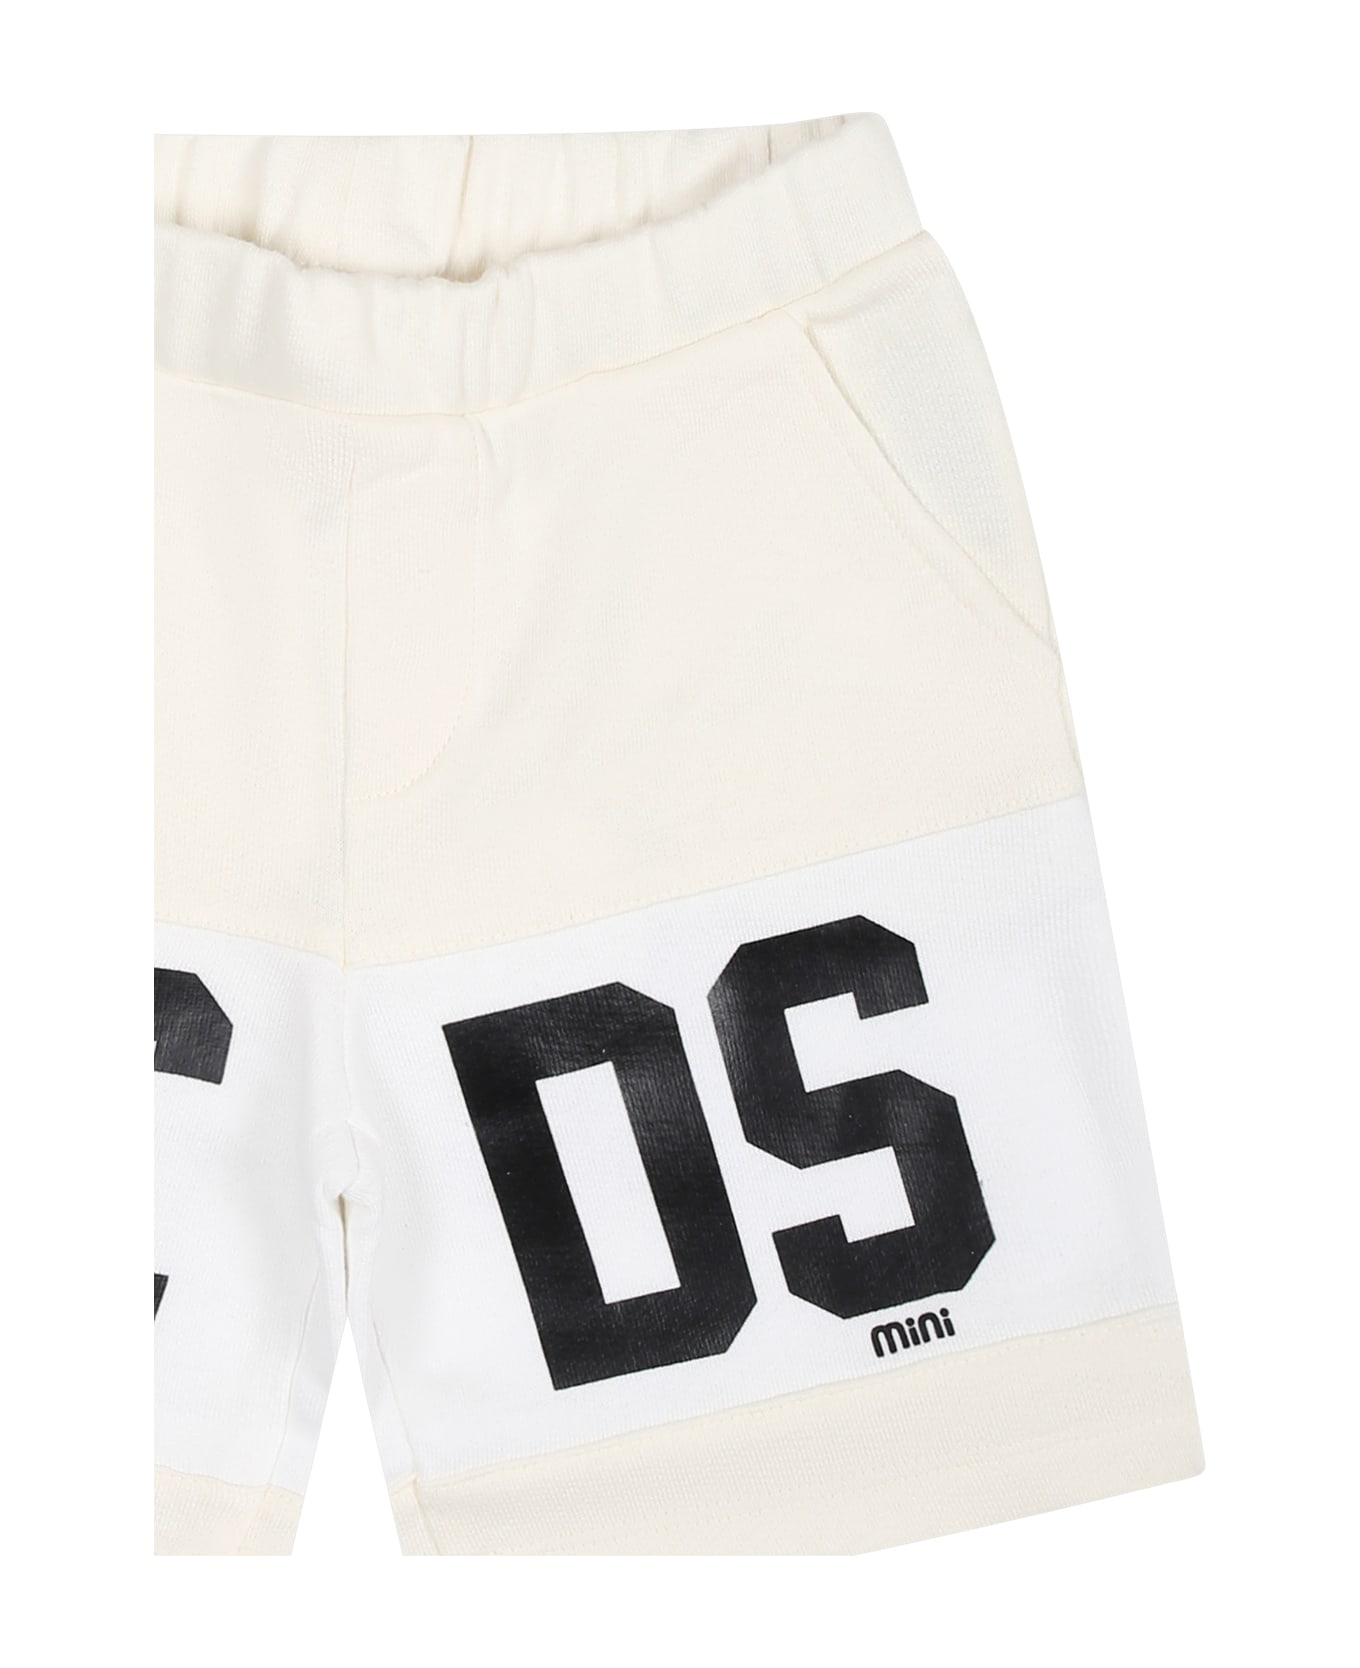 GCDS Mini White Sports Shorts For Babies With Logo - Ivory